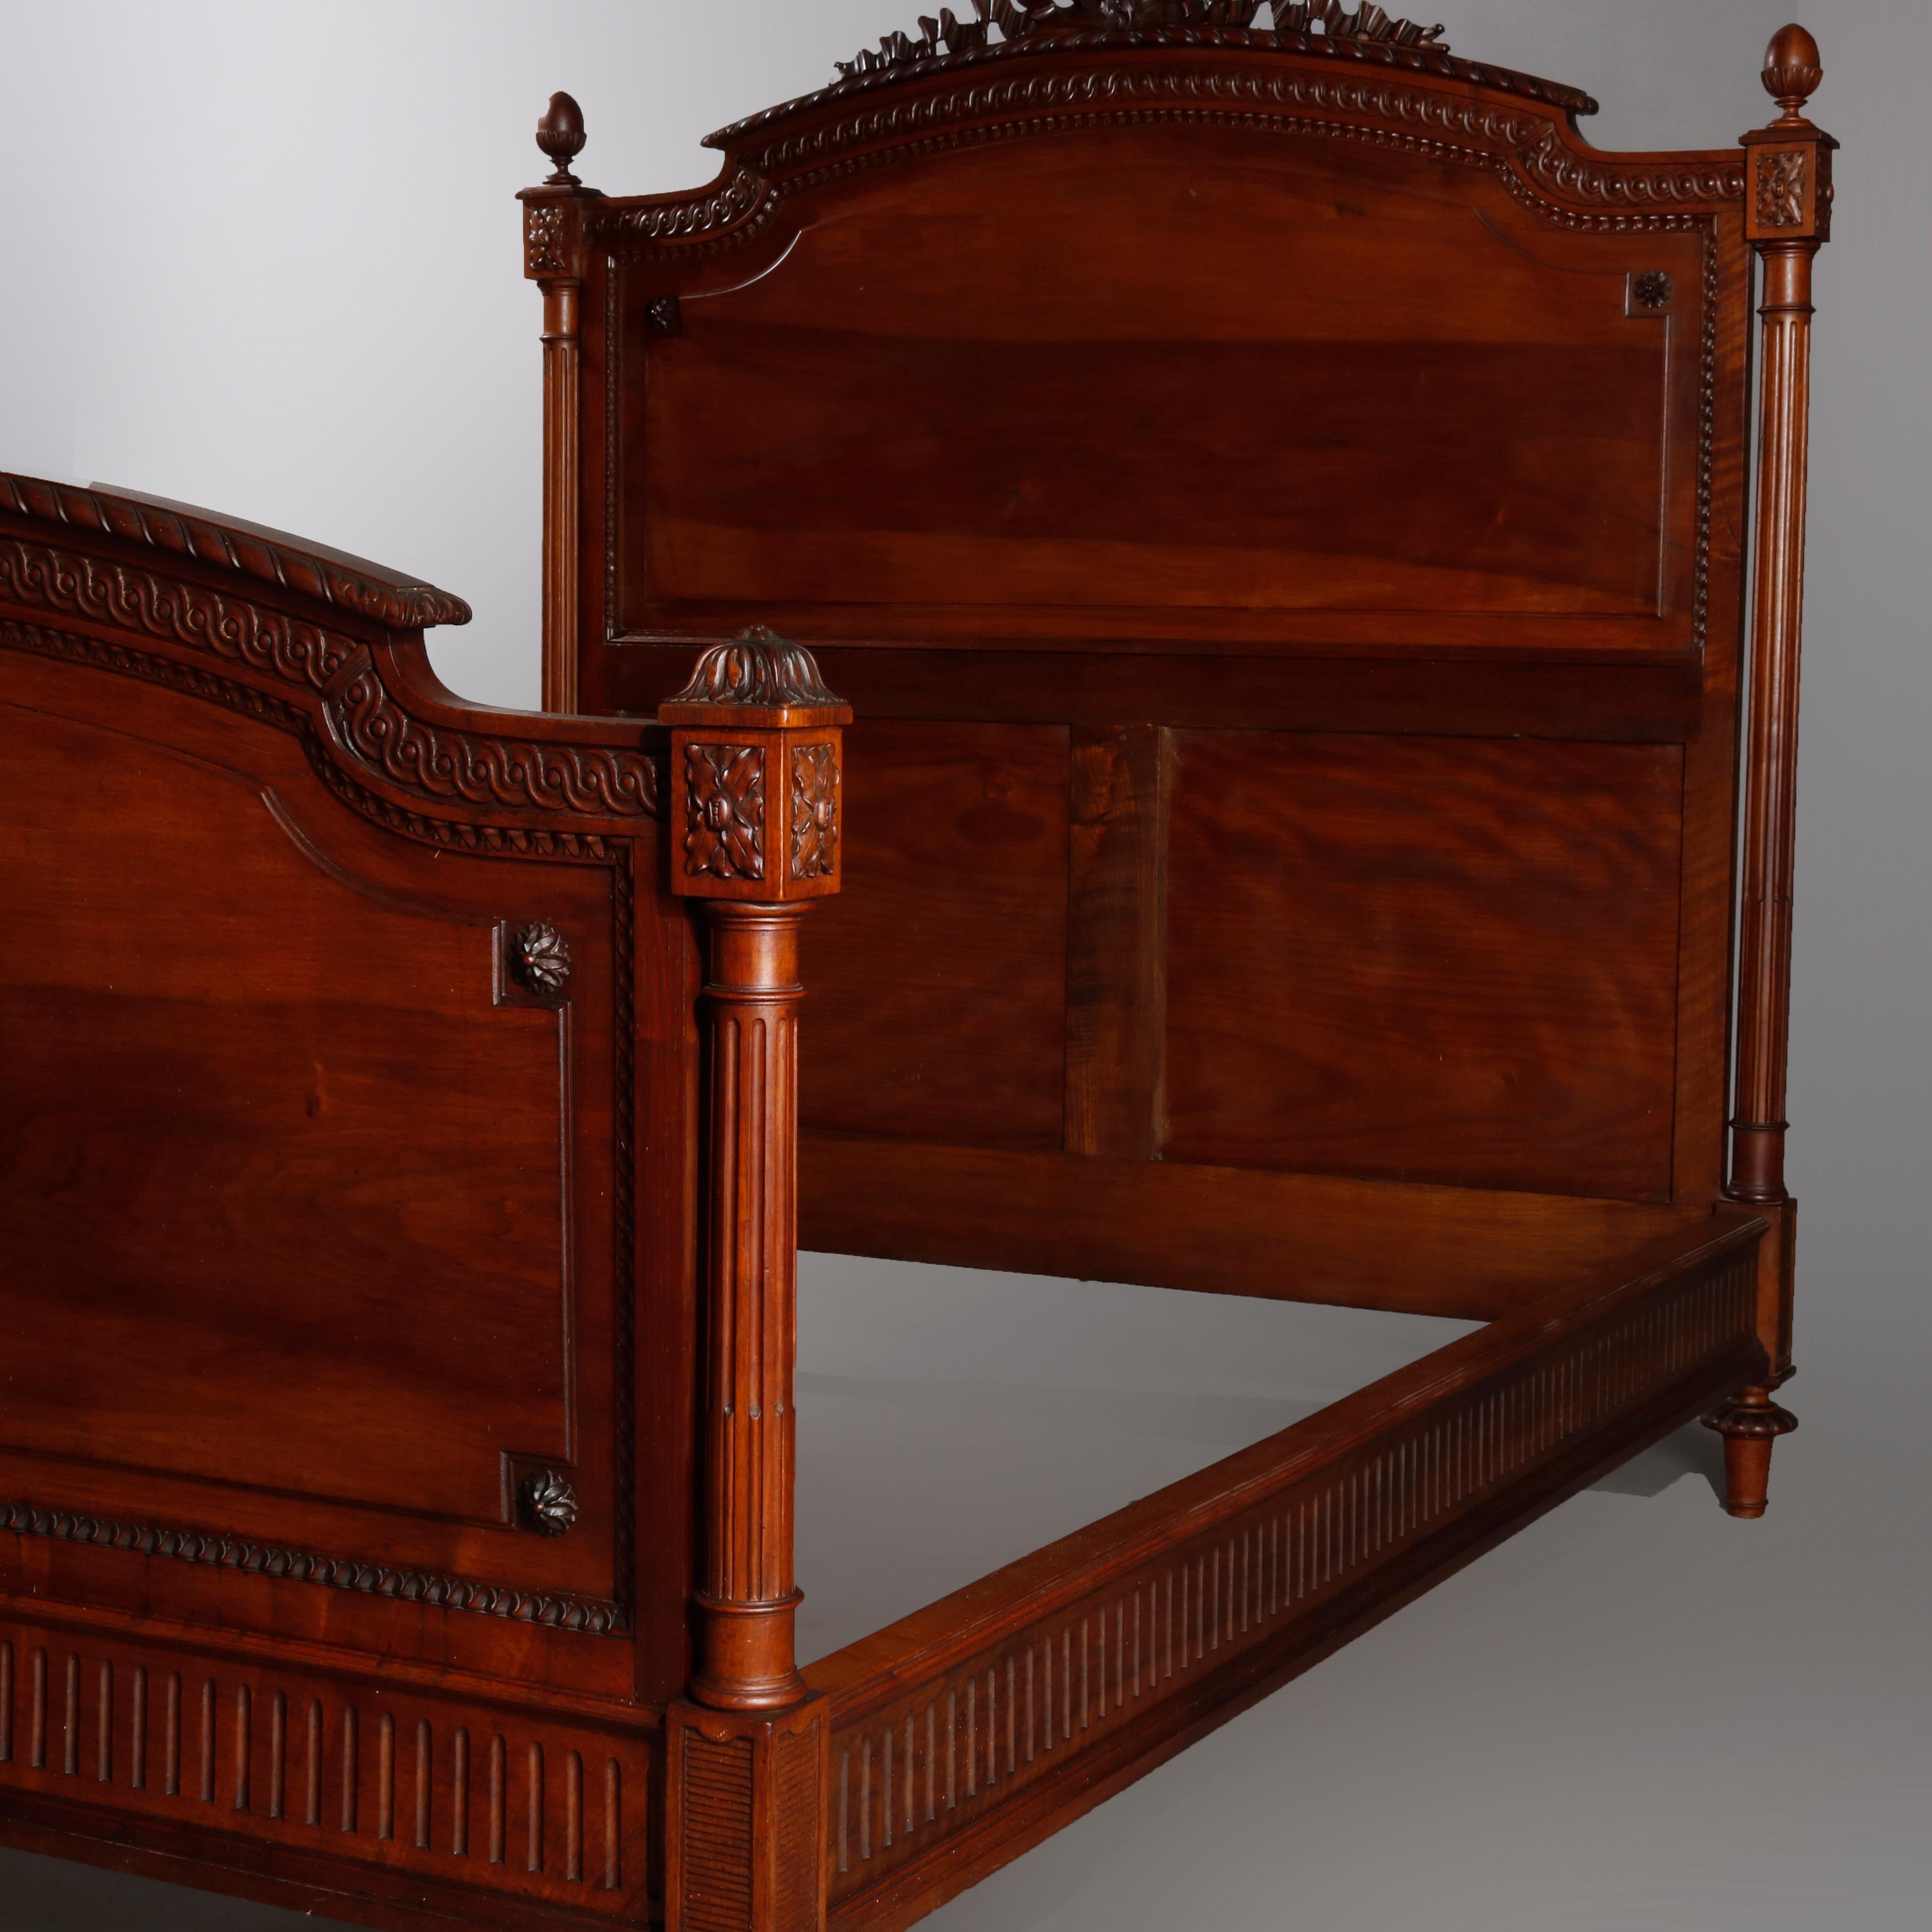 French Louis XVI carved mahogany bed frame with pierced ribbon crest over headboard with heavily carved bordering, rosettes, full turned and reeded columns, acorn finials, raised on turned tapered legs, fluted side rails, 20th century

Measures: